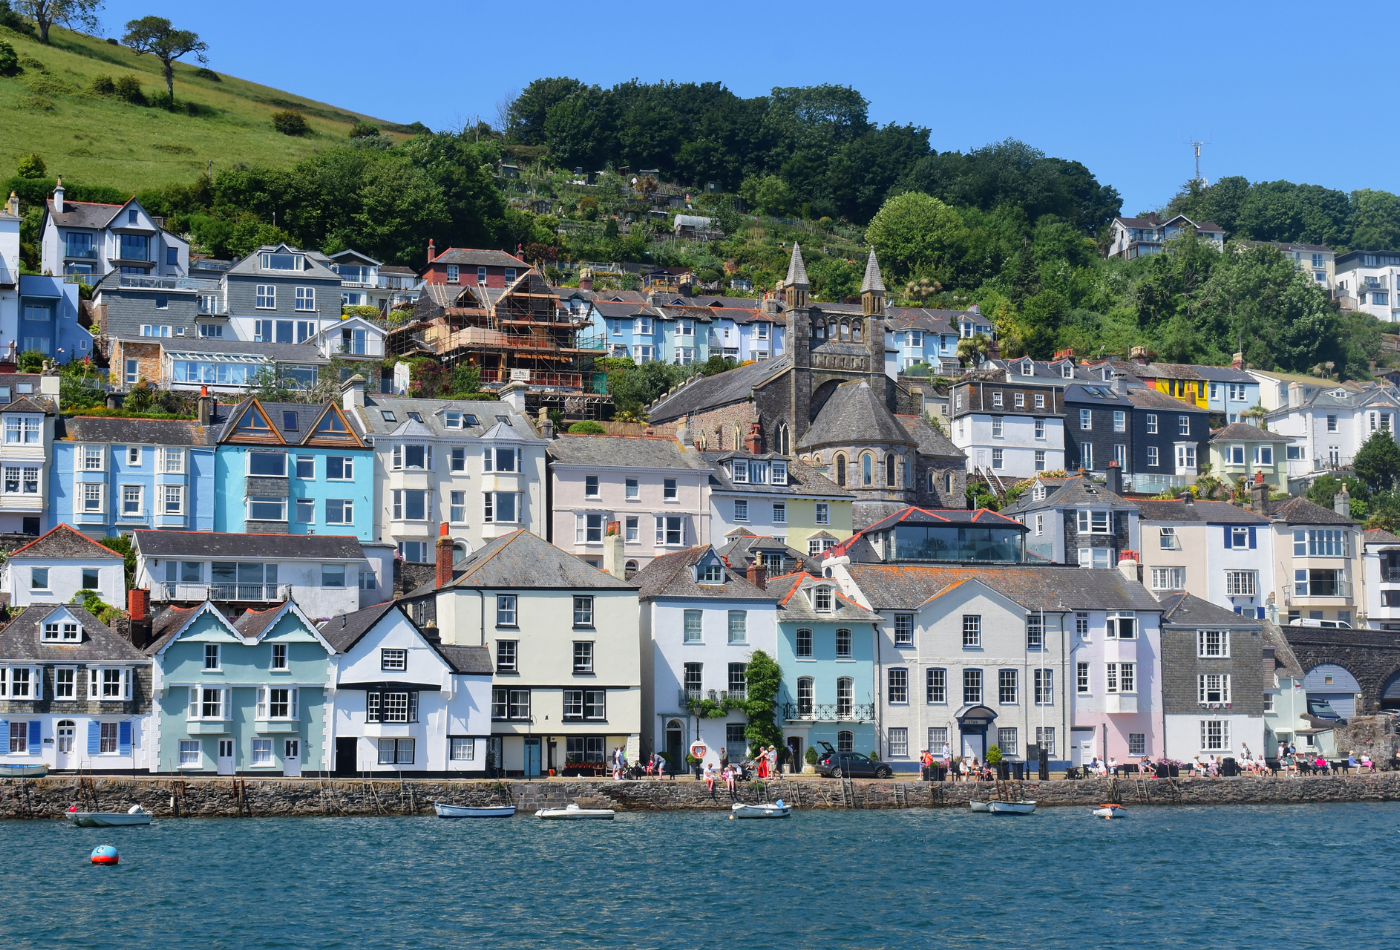 A view of Dartmouth across the harbour